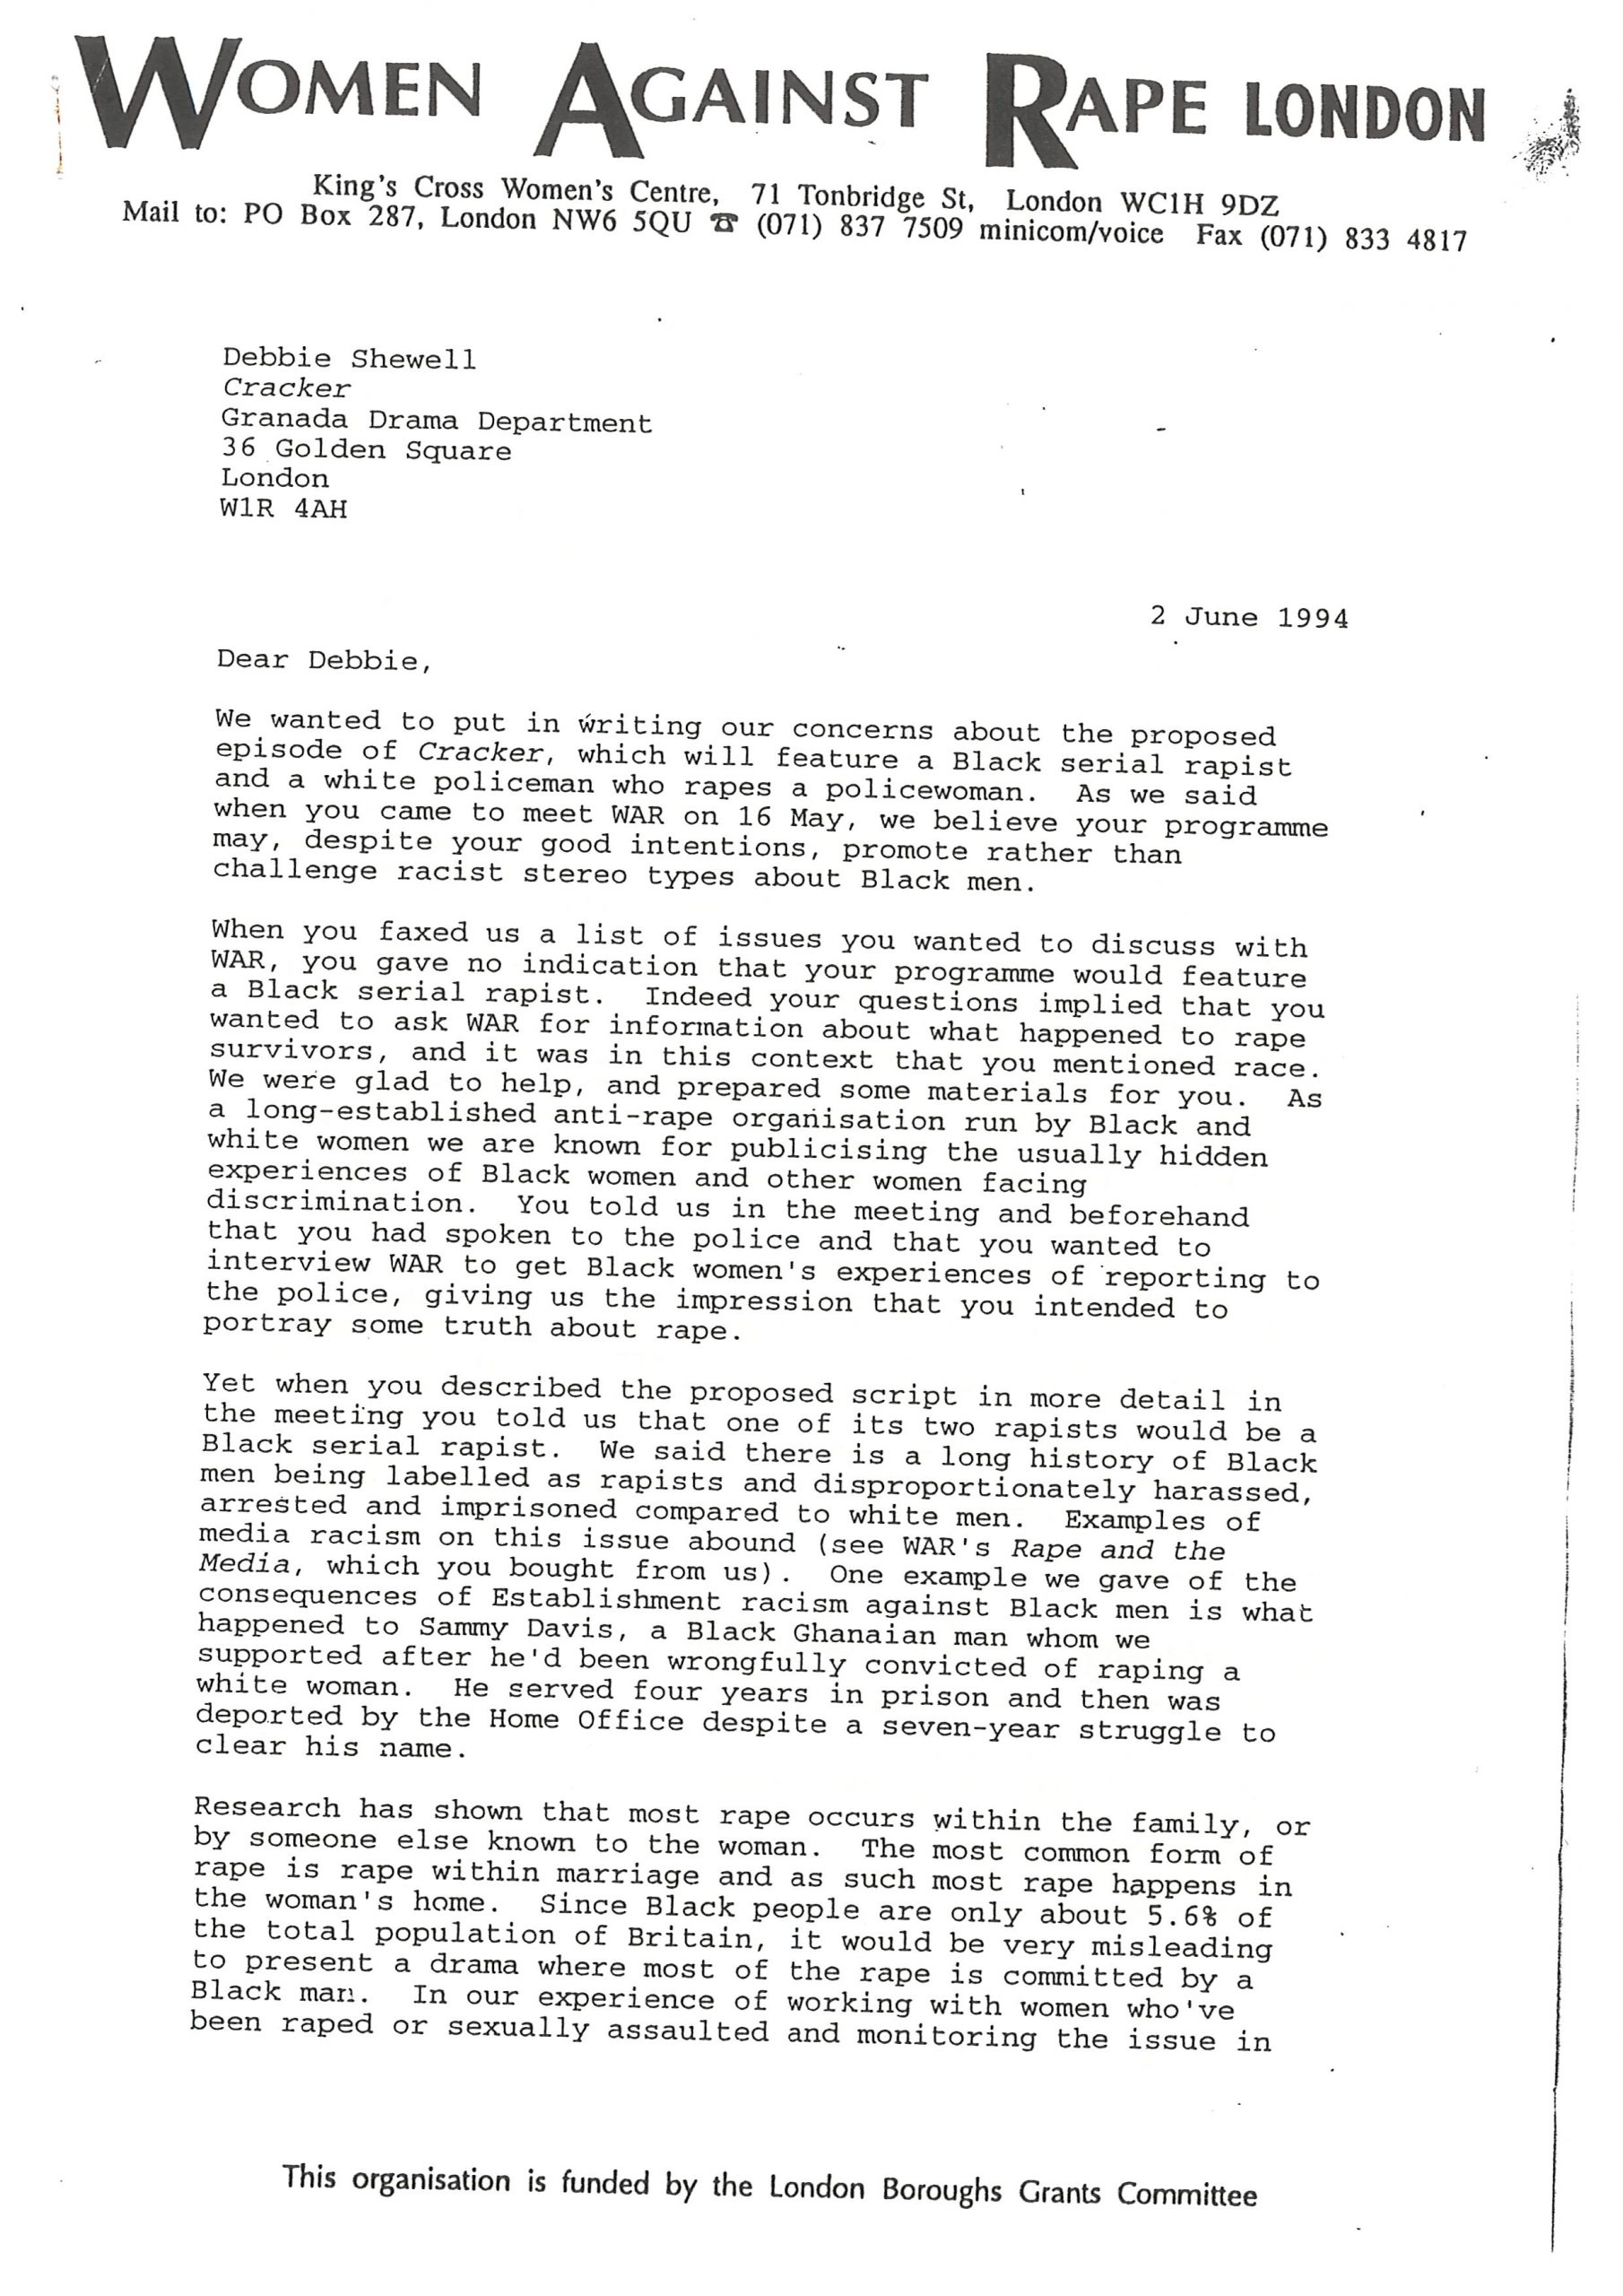 1994_letter to Debbie Shewell